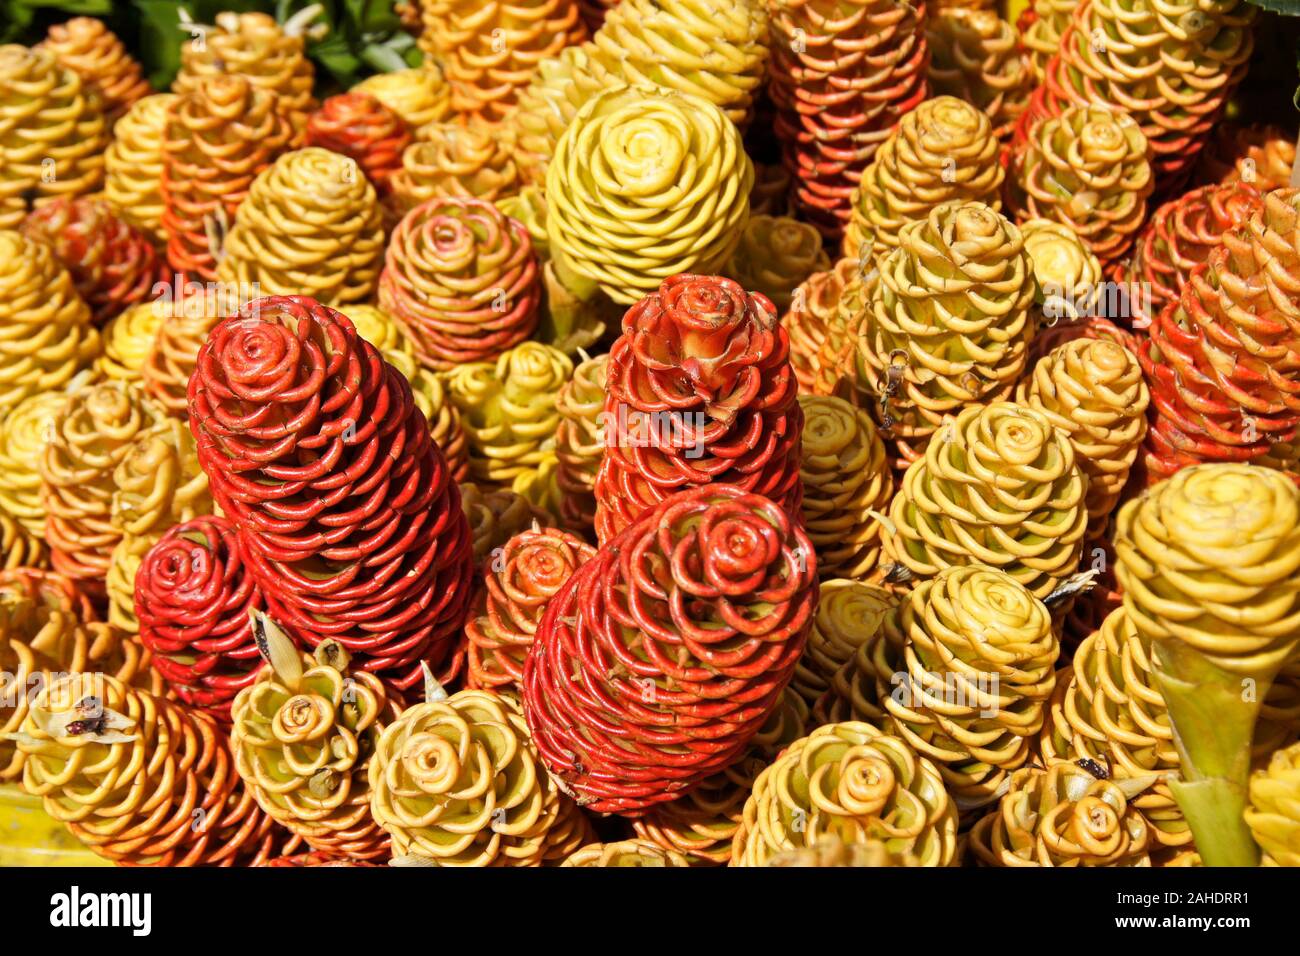 Colorful bromeliad flowers displayed for sale at Paloquemao market, Bogota, Colombia Stock Photo